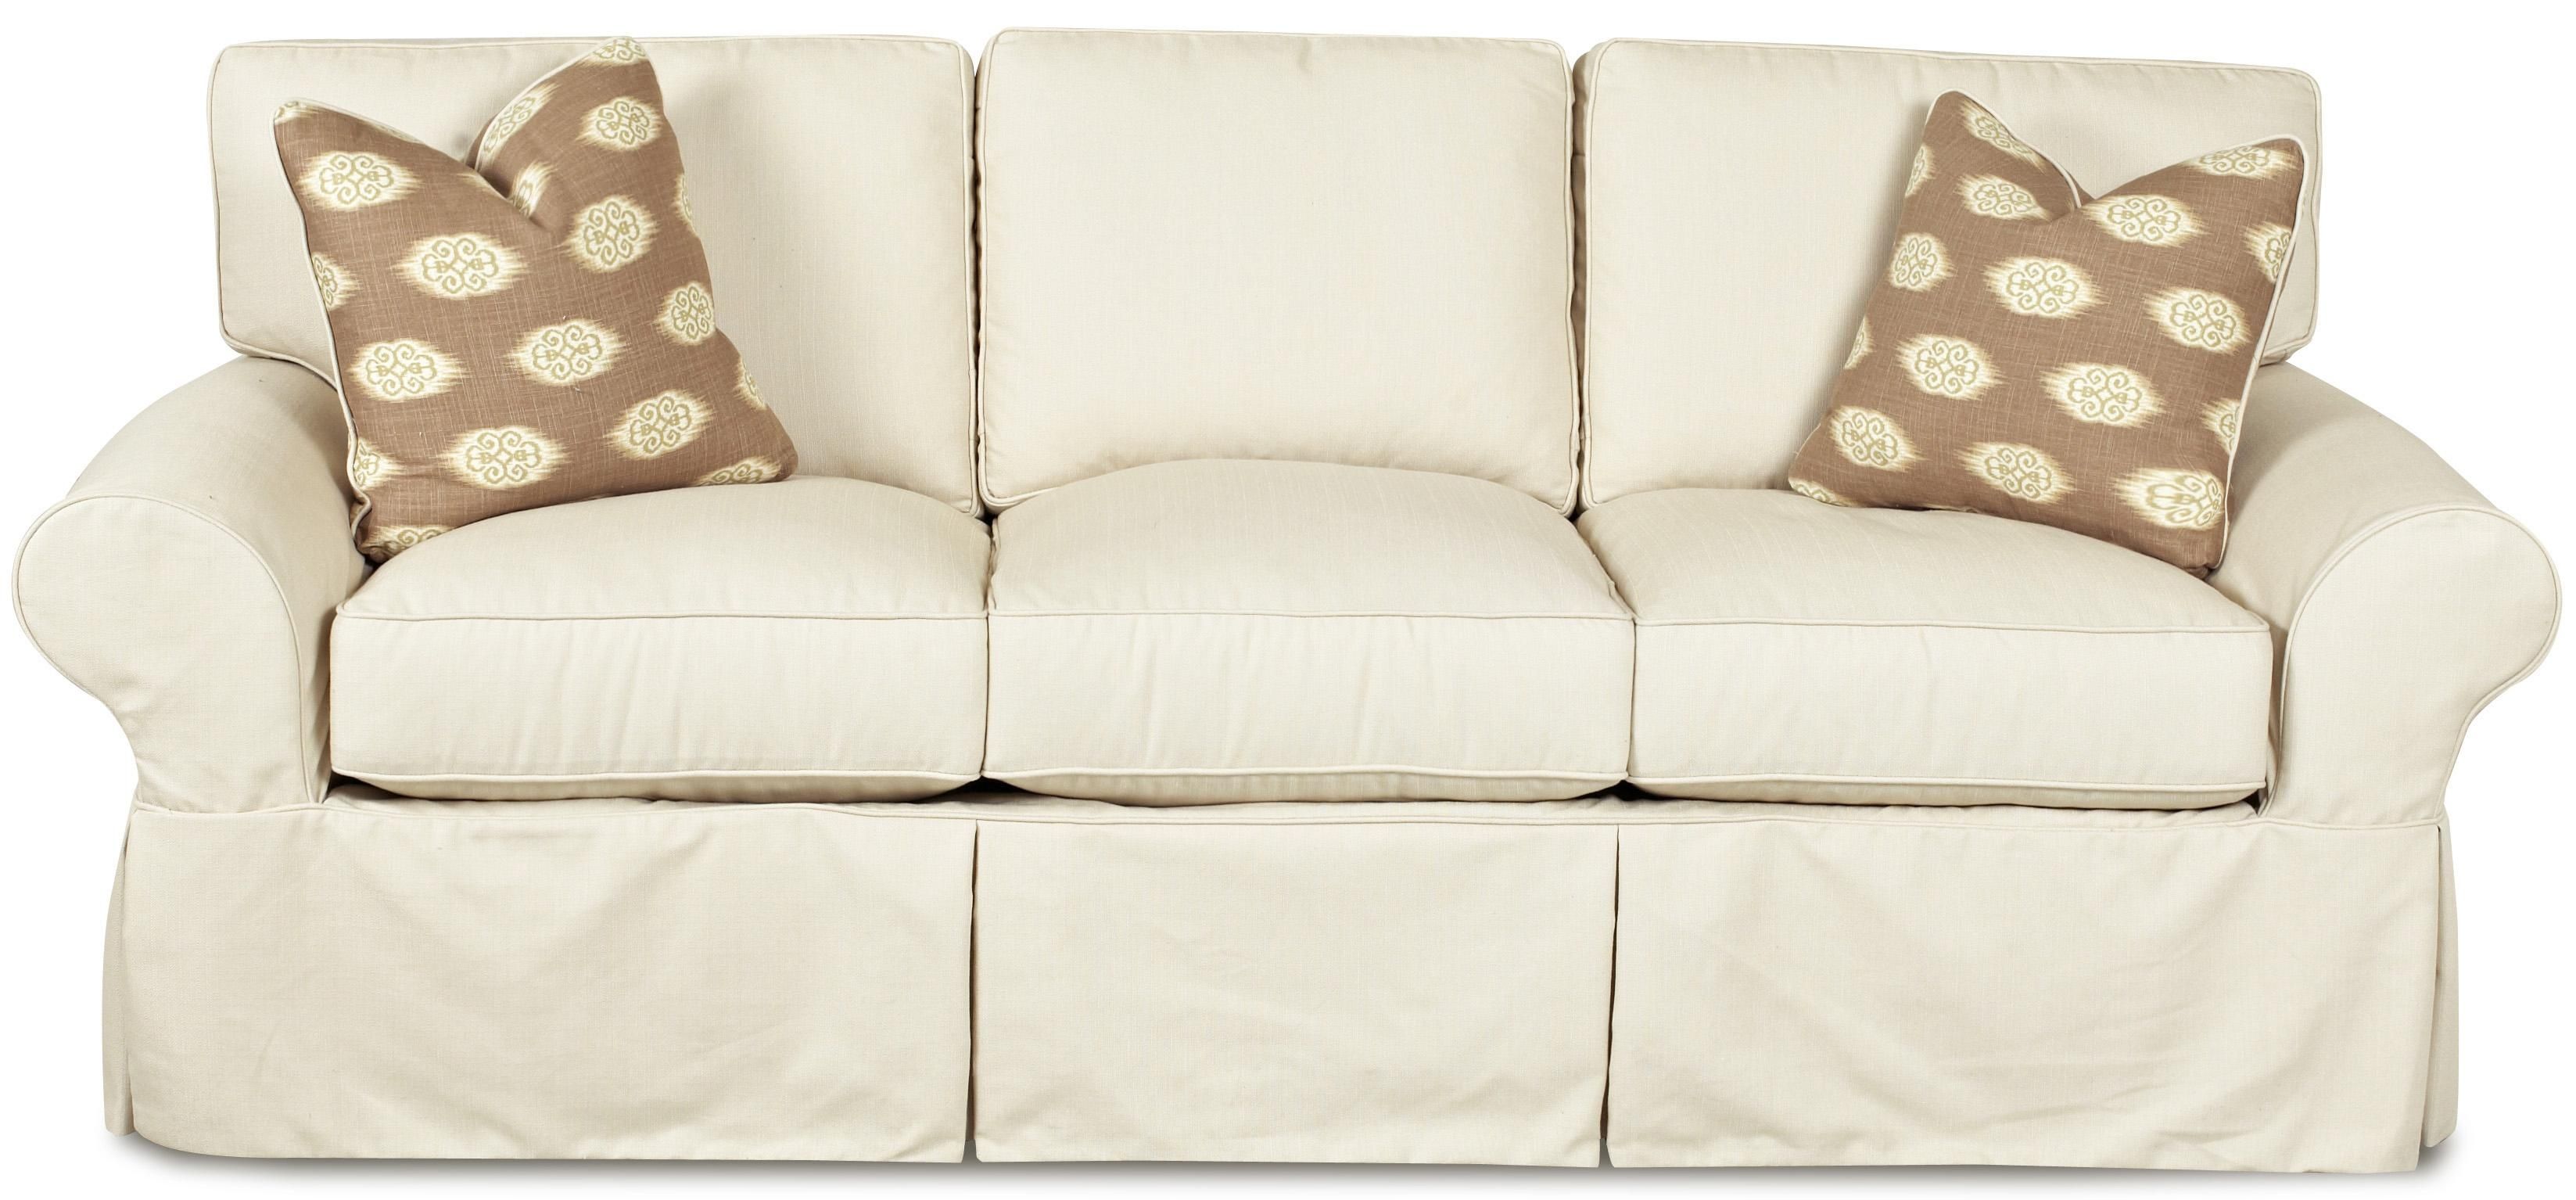 Sofas Center Reclining Sofa Covers Overstuffed Chair Cover For Clearance Sofa Covers (View 10 of 12)